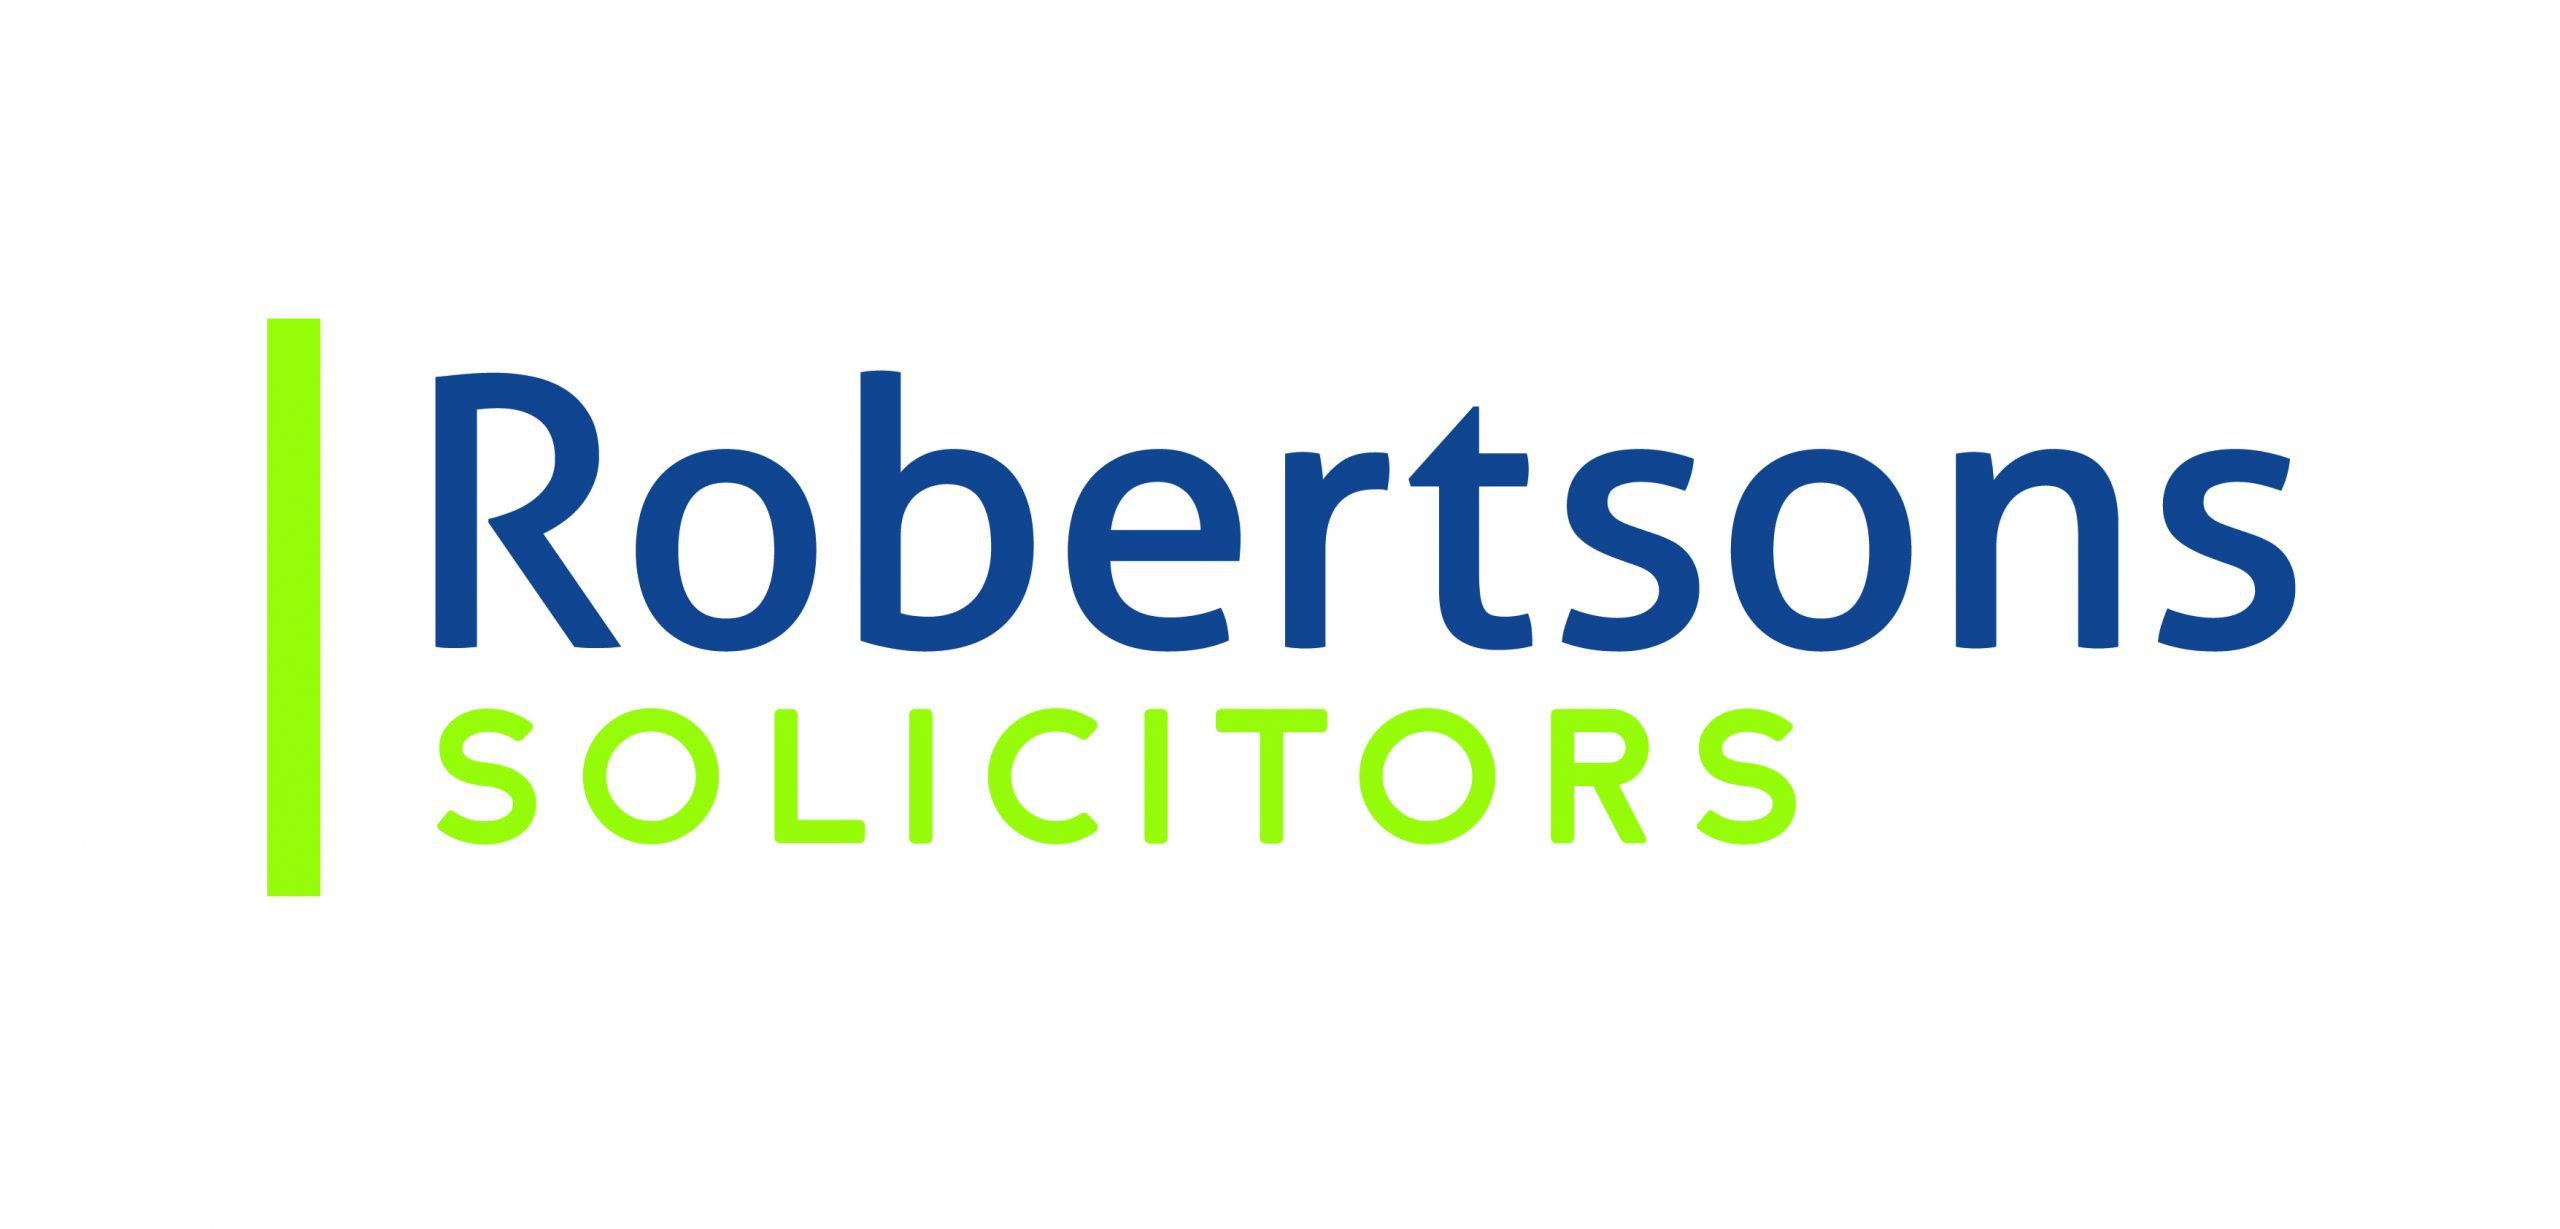 PRESS RELEASE: Central Cardiff Law Firm Robertsons undergoes Brand Evolution